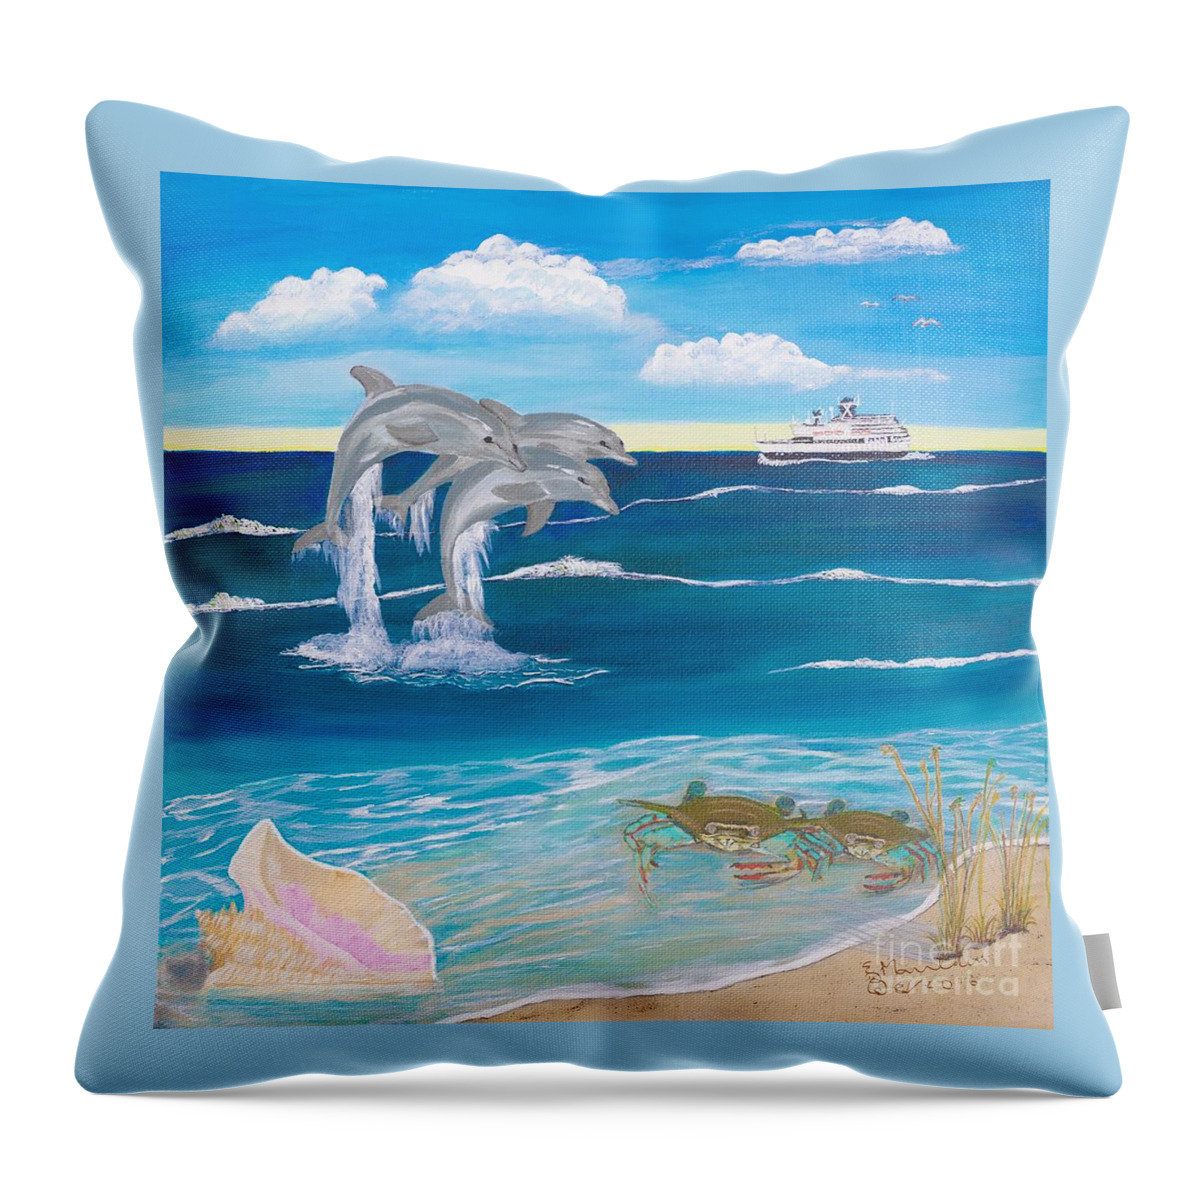 Ocean Throw Pillow featuring the painting Ocean Life by Elizabeth Mauldin